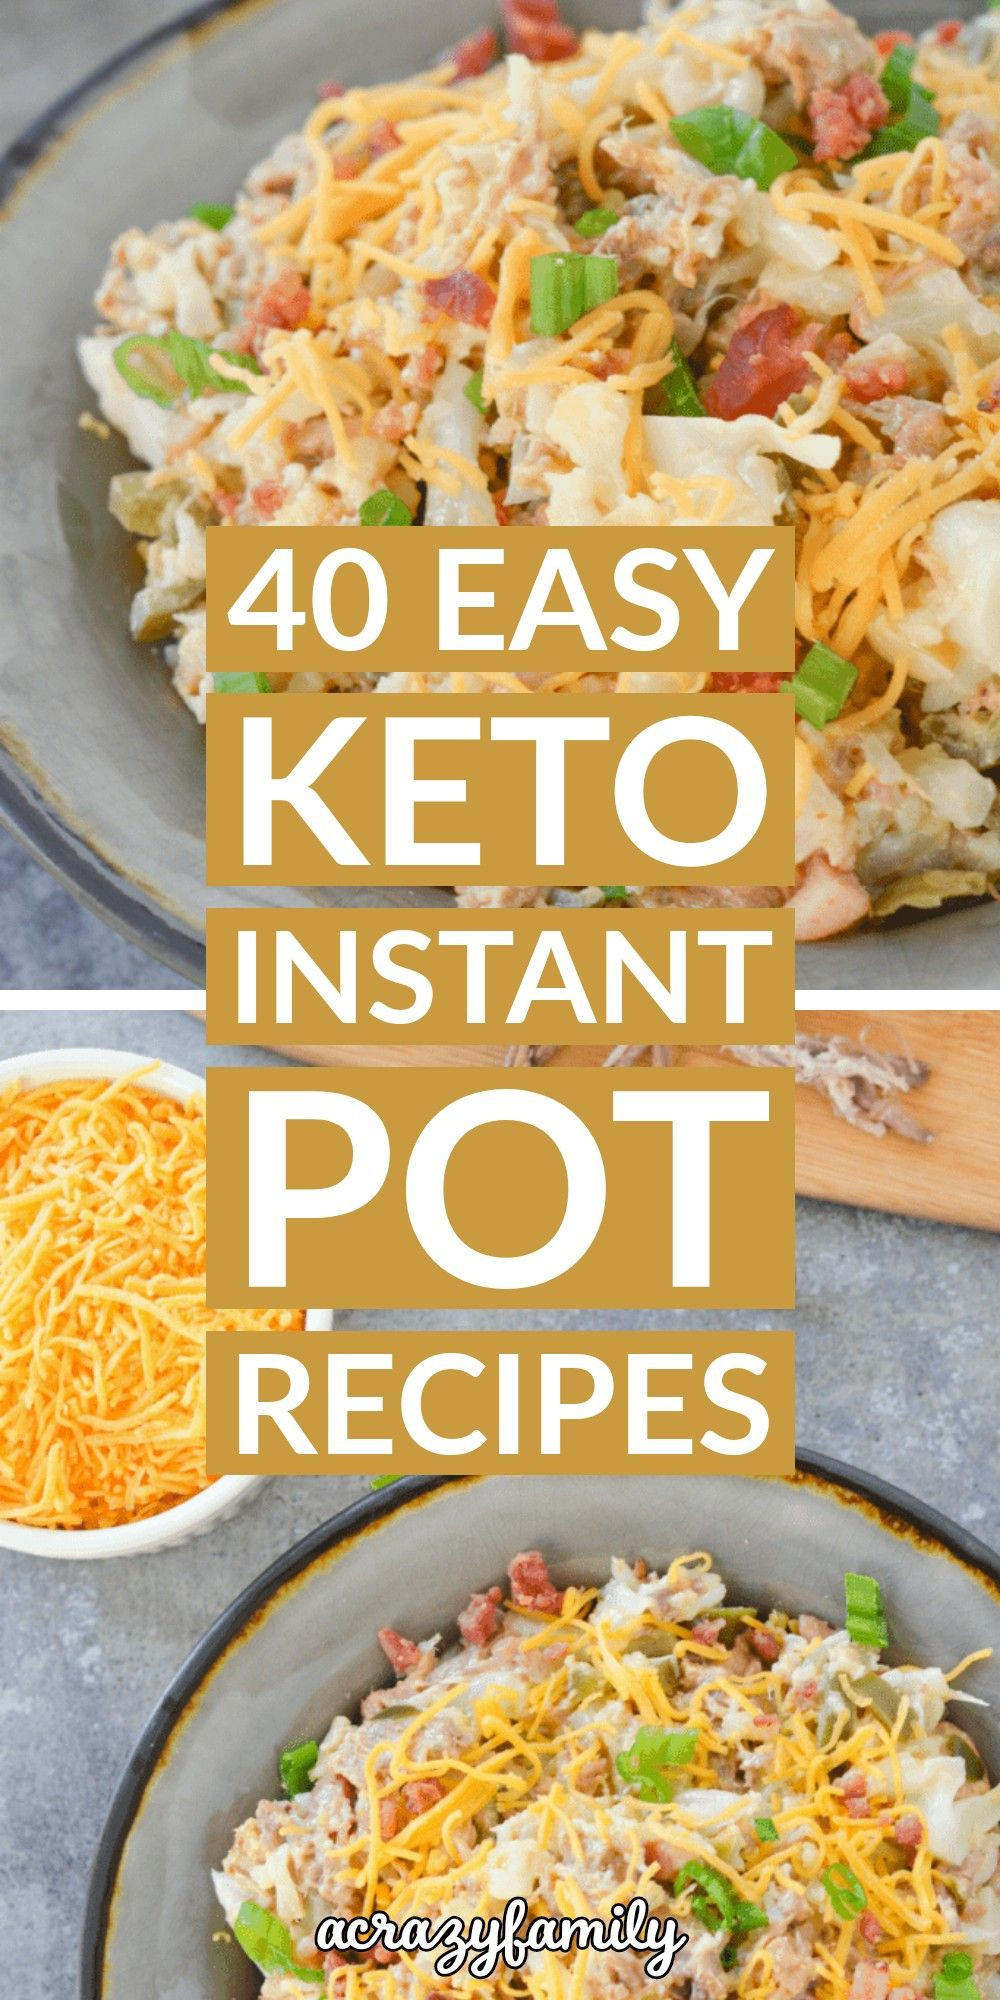 Instant Pot Recipes Easy Healthy Keto
 40 Easy Instant Pot Keto Recipes You Must Try in 2020